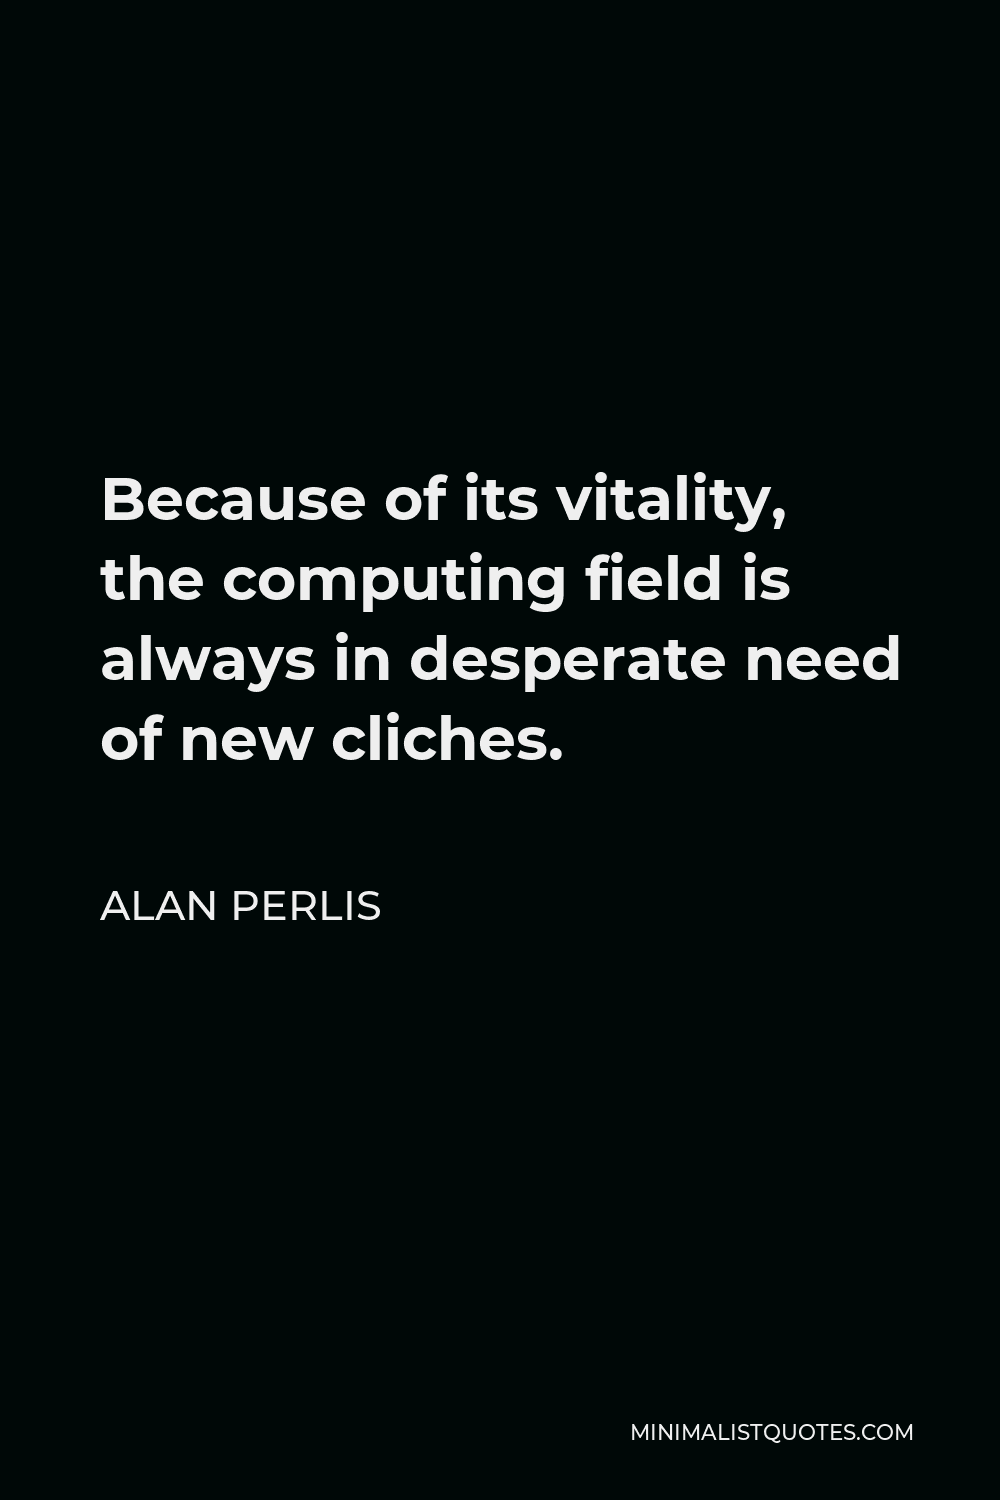 Alan Perlis Quote - Because of its vitality, the computing field is always in desperate need of new cliches.